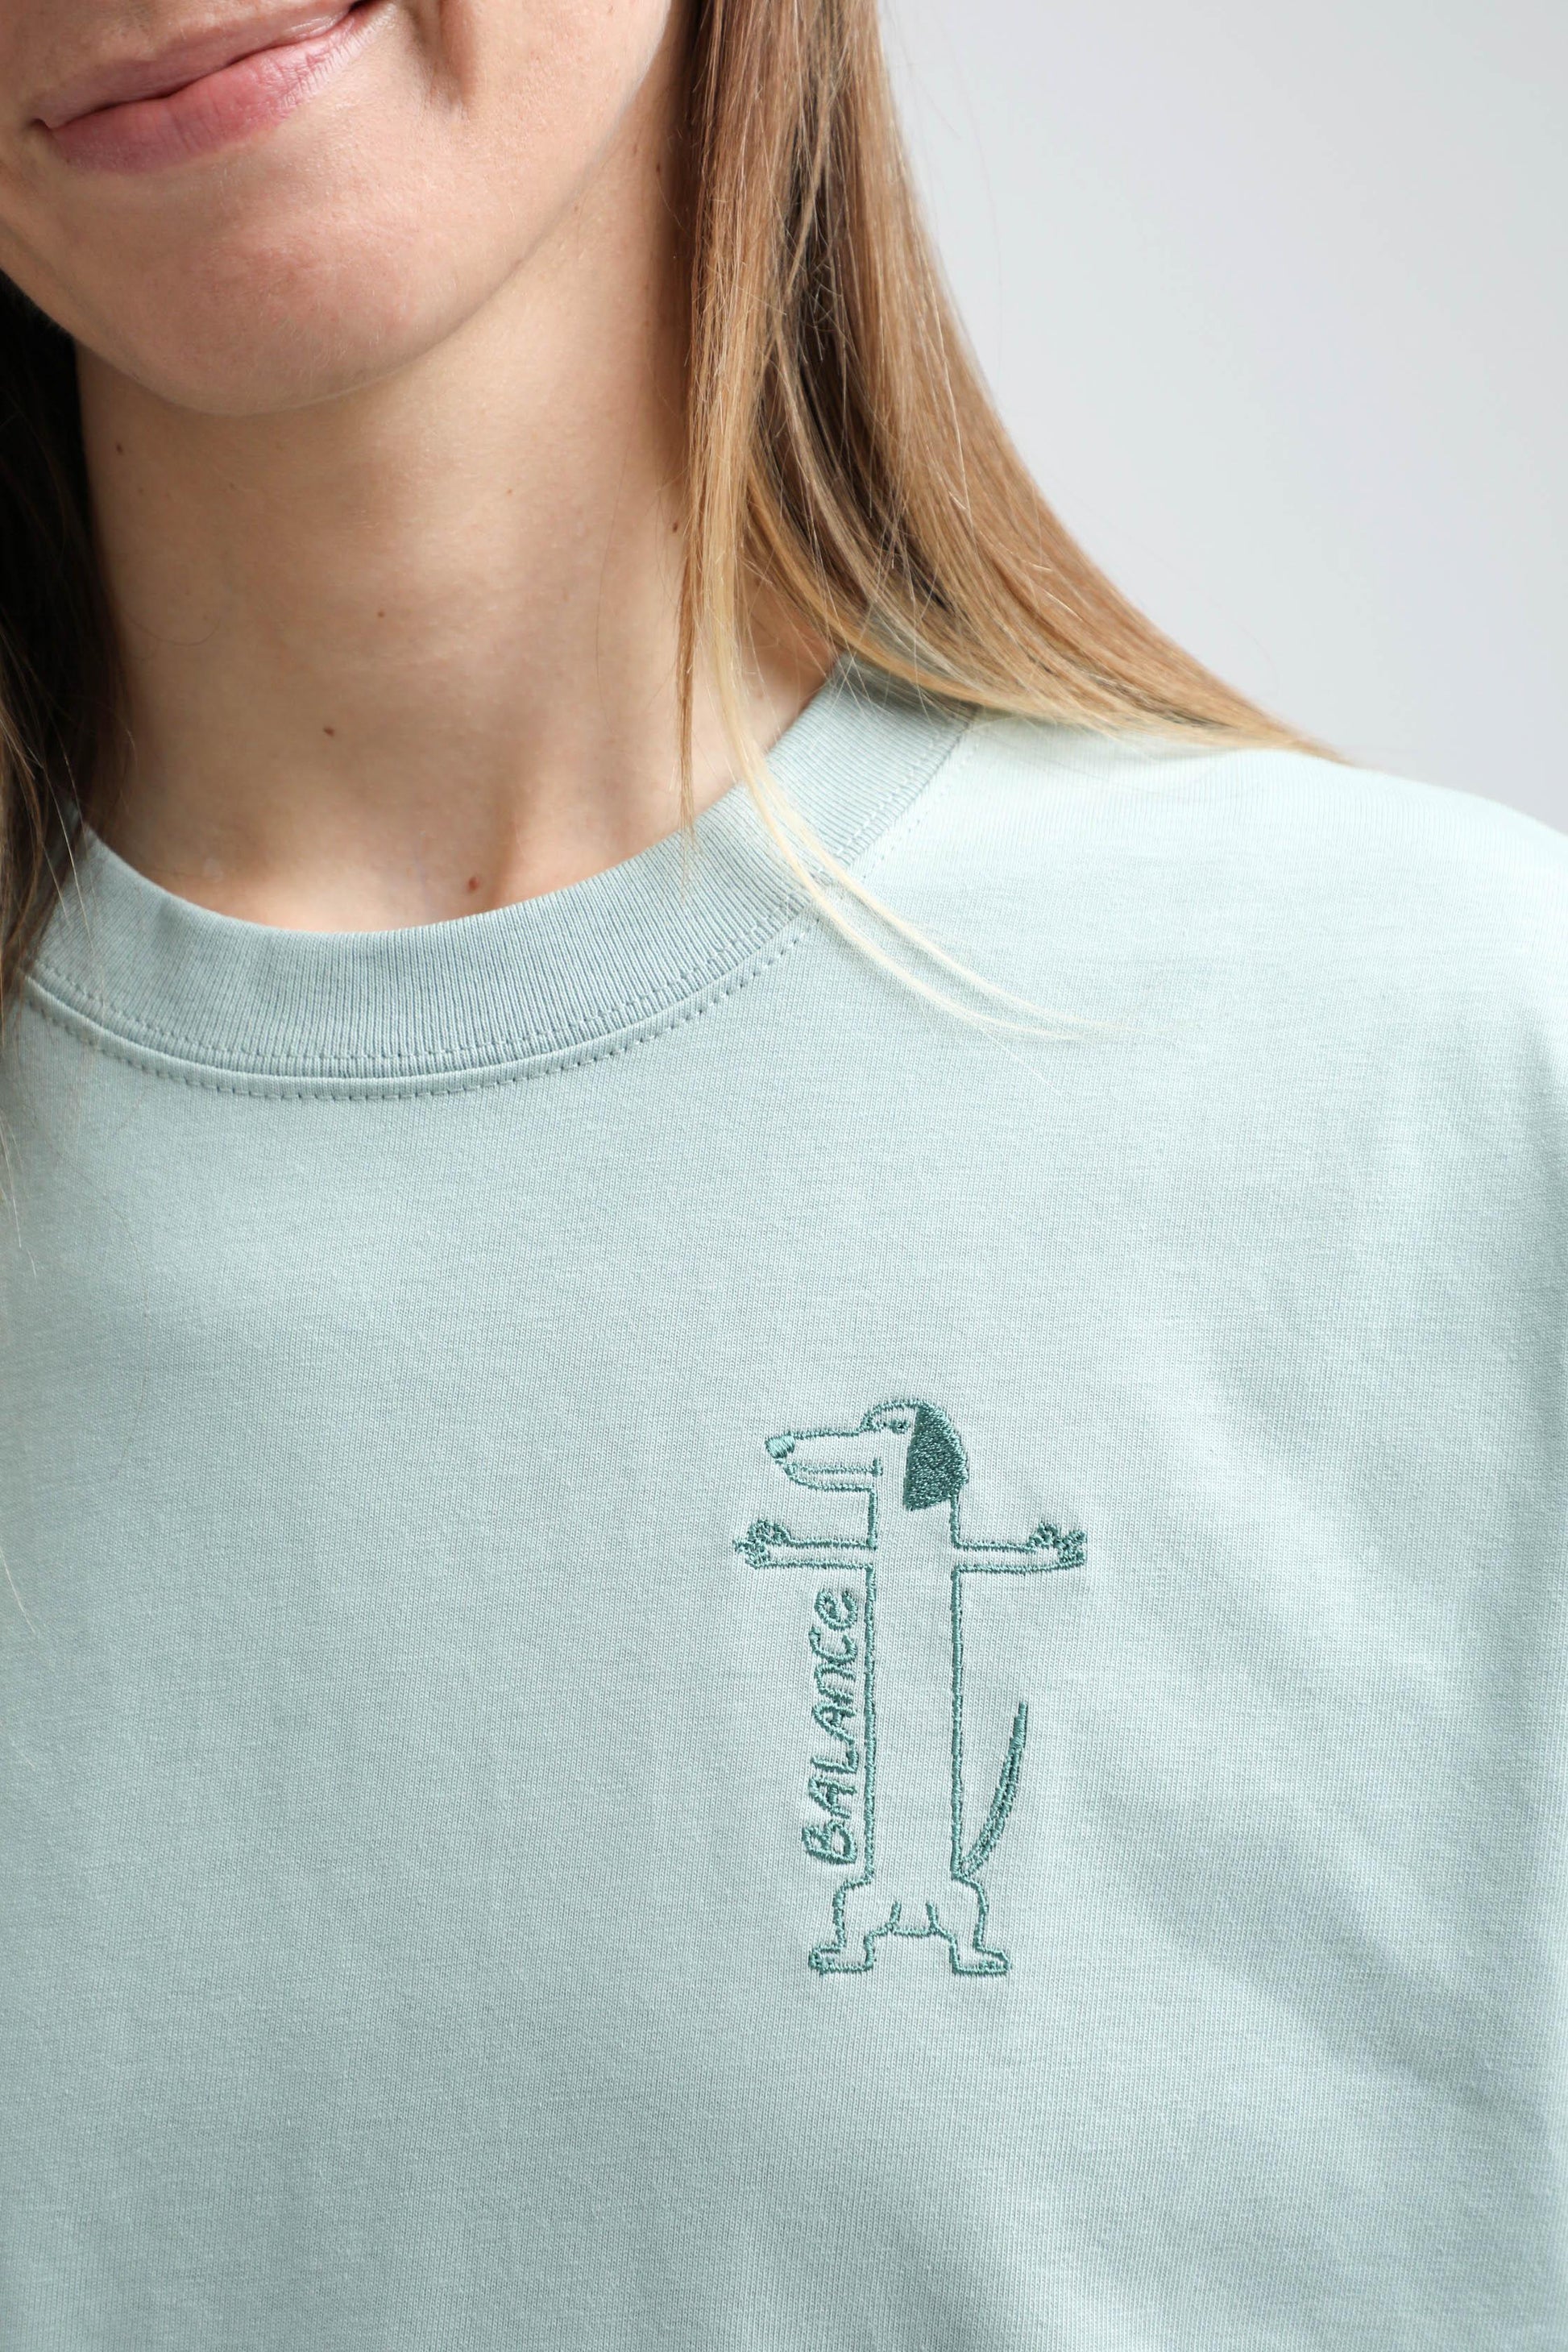 XL available only | Balance | Heavyweight T-Shirt with embroidered dog. Oversized | Unisex - premium dog goods handmade in Europe by animalistus